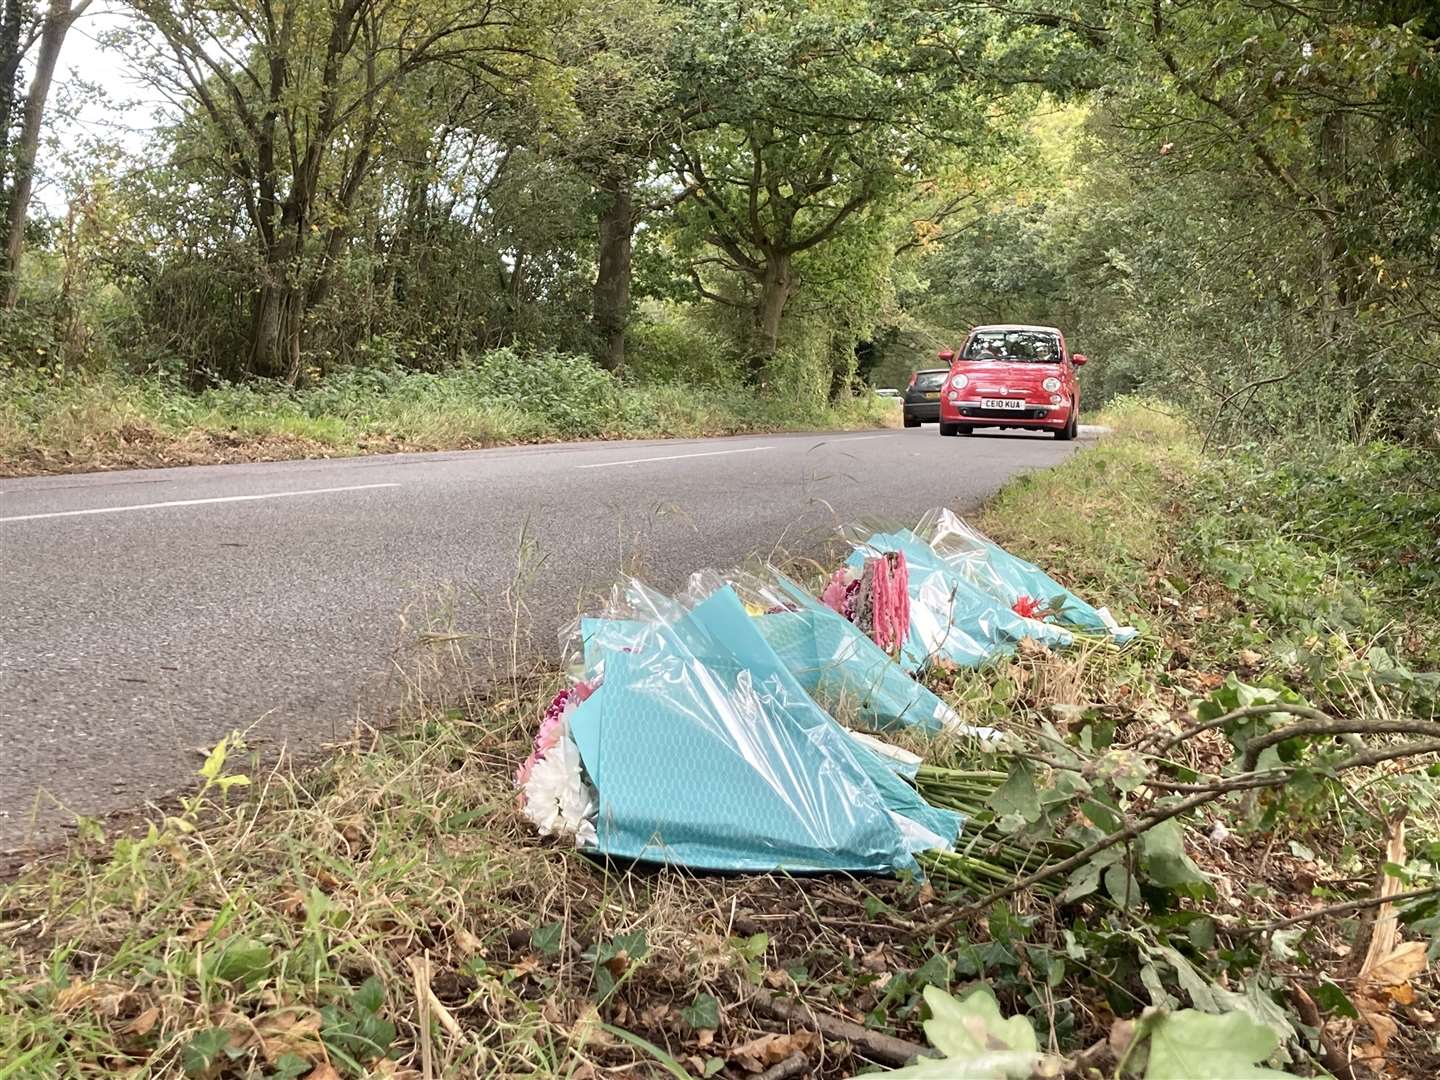 Floral tributes were left along the side of the road in Lenham Road, Headcorn to members of the Cash family killed in a crash